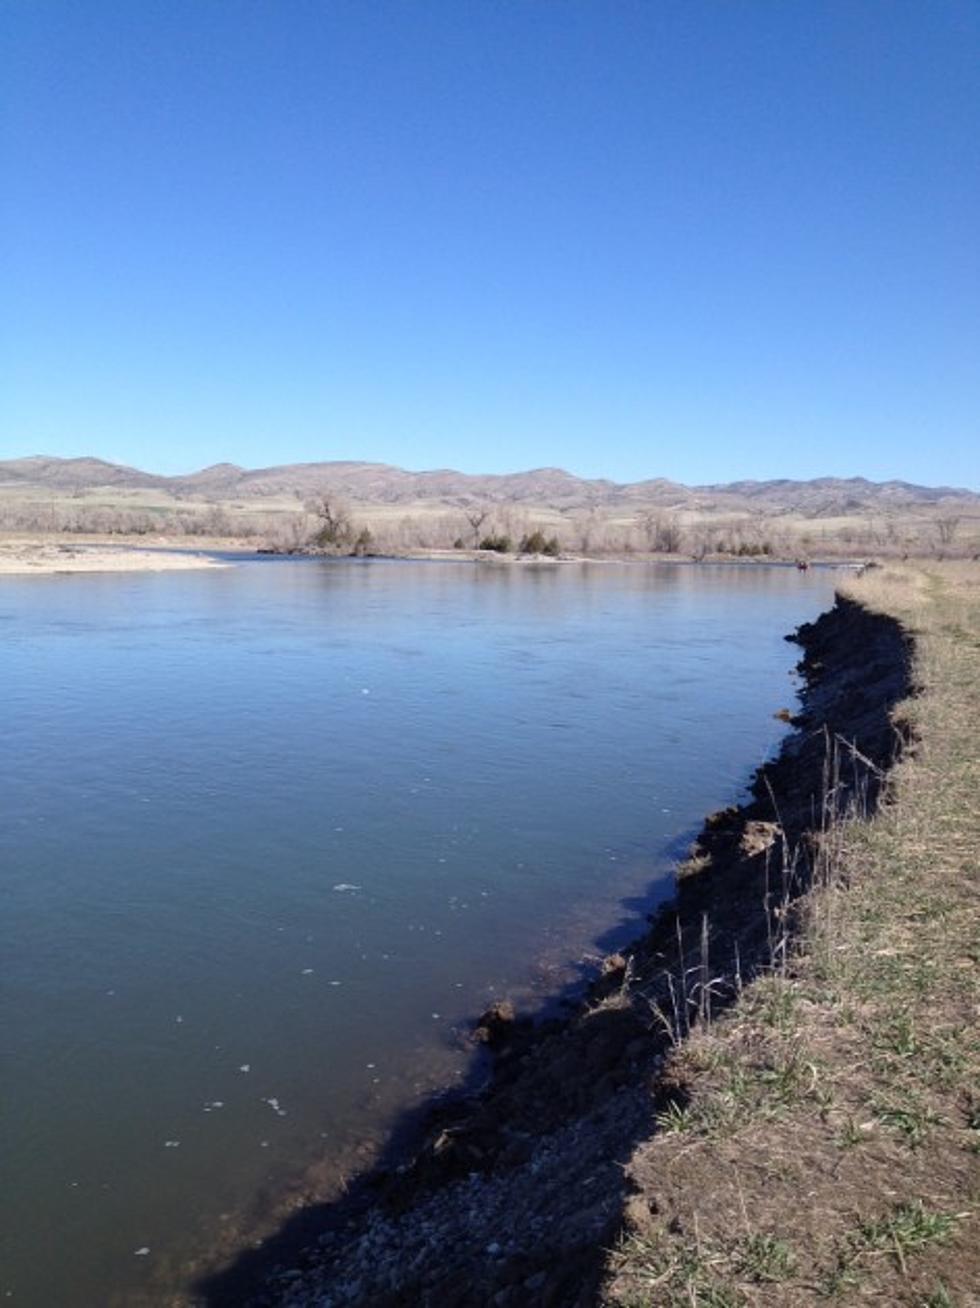 $1.1 Million for Drought Measures in Missouri Headwaters Basin